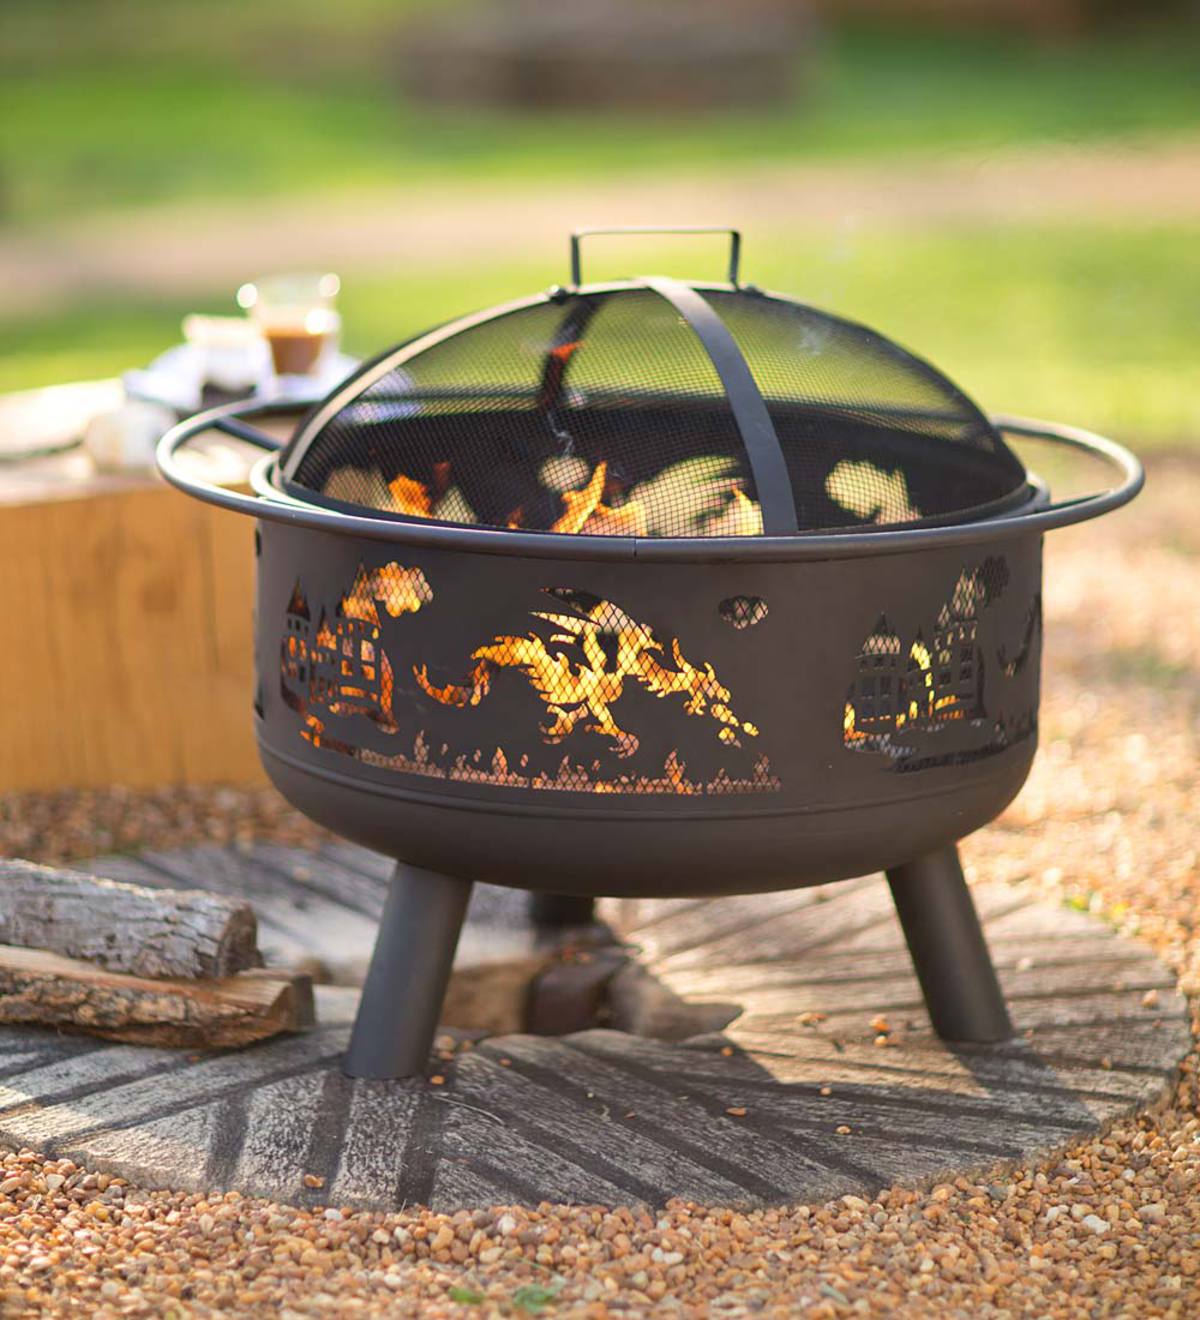 Dragon-Themed Steel Fire Pit | Wind and Weather